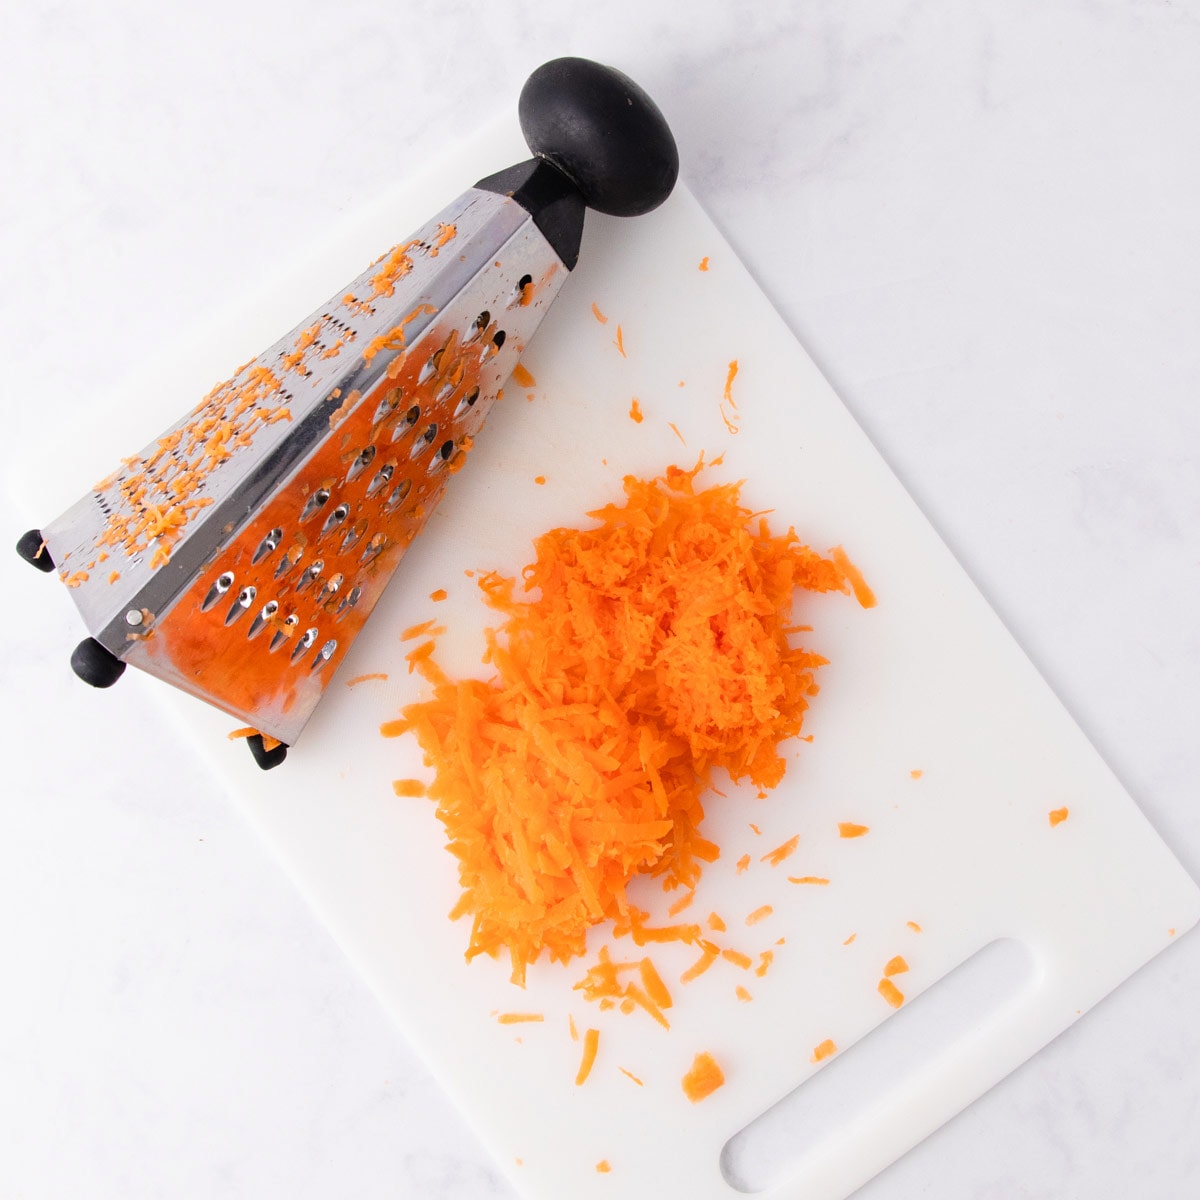 Shredded carrots on a white chopping board, next to a pyramid box grater.